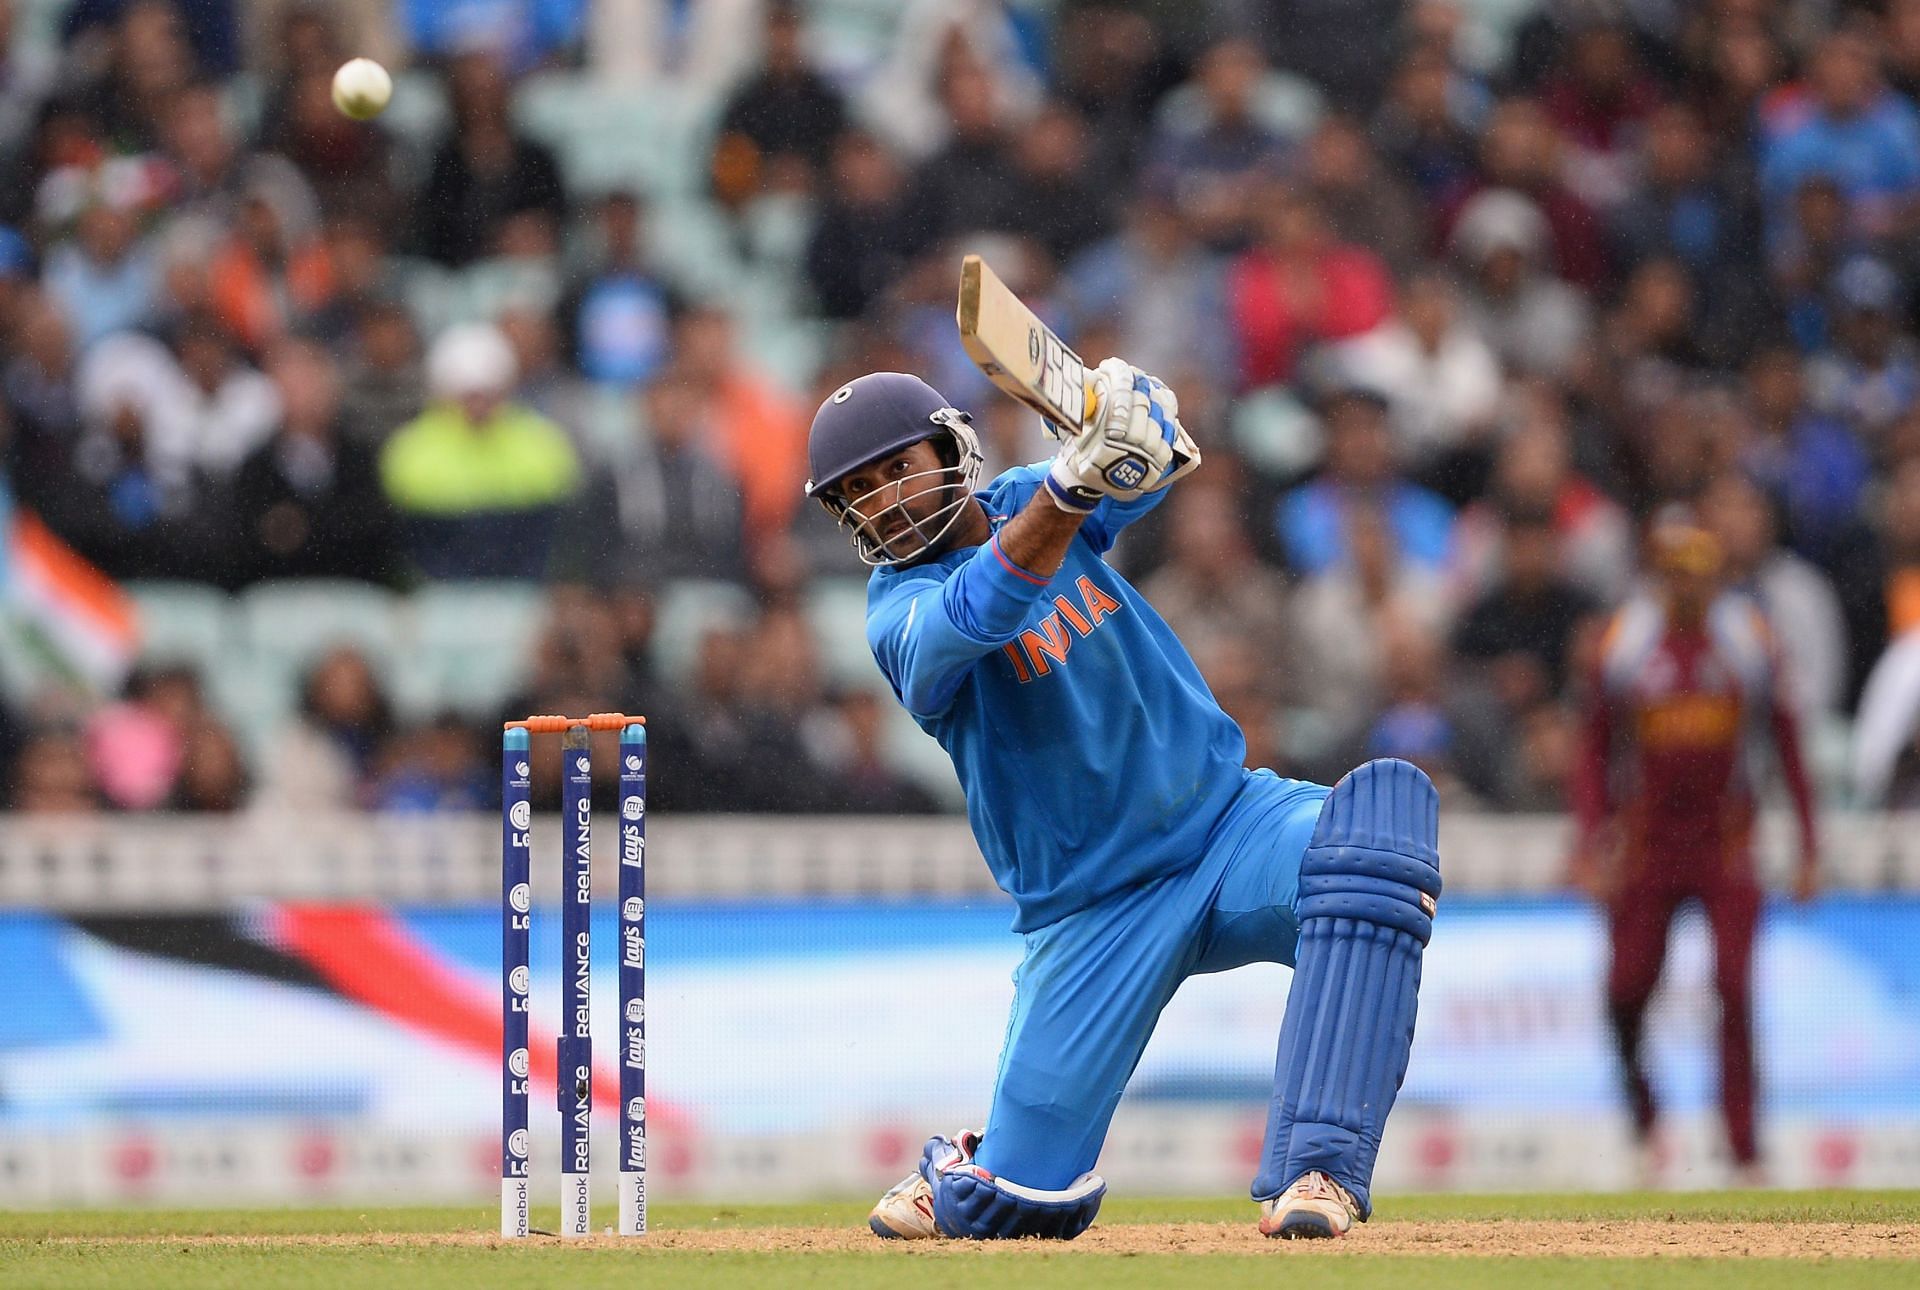 Dinesh Karthik batting during the ICC Champions Trophy 2013 match against West Indies at The Kia Oval. Pic: Getty Images